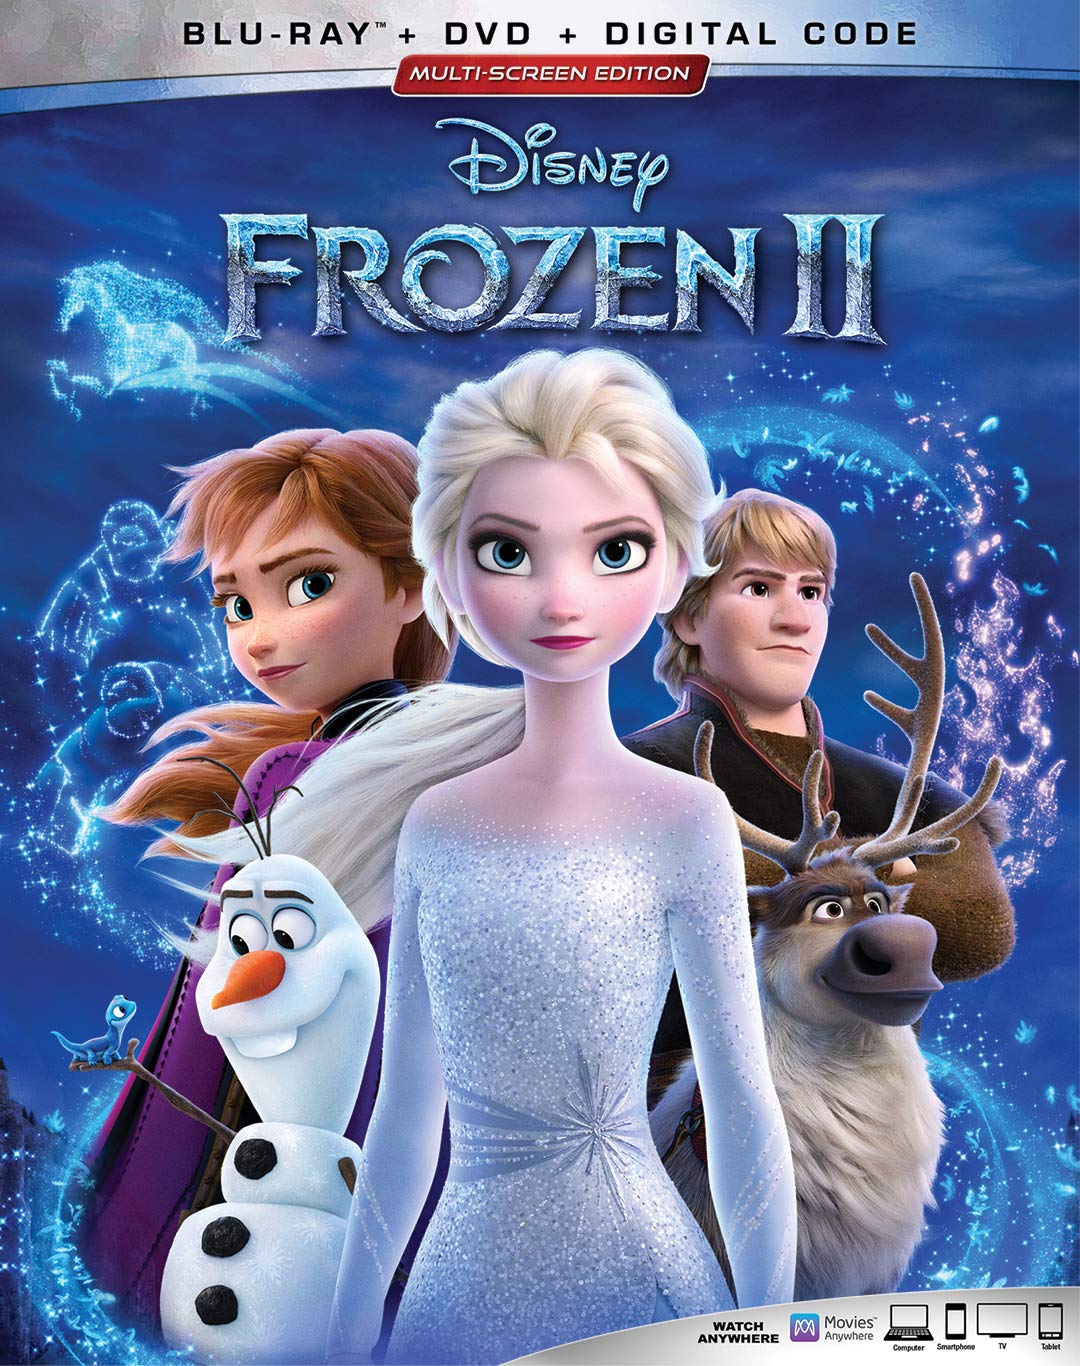 Frozen 2 Blu-Ray is out! There will be lots of bonus exclisive materials on  Frozen 2 Blu-Ray and DVD. See details. 